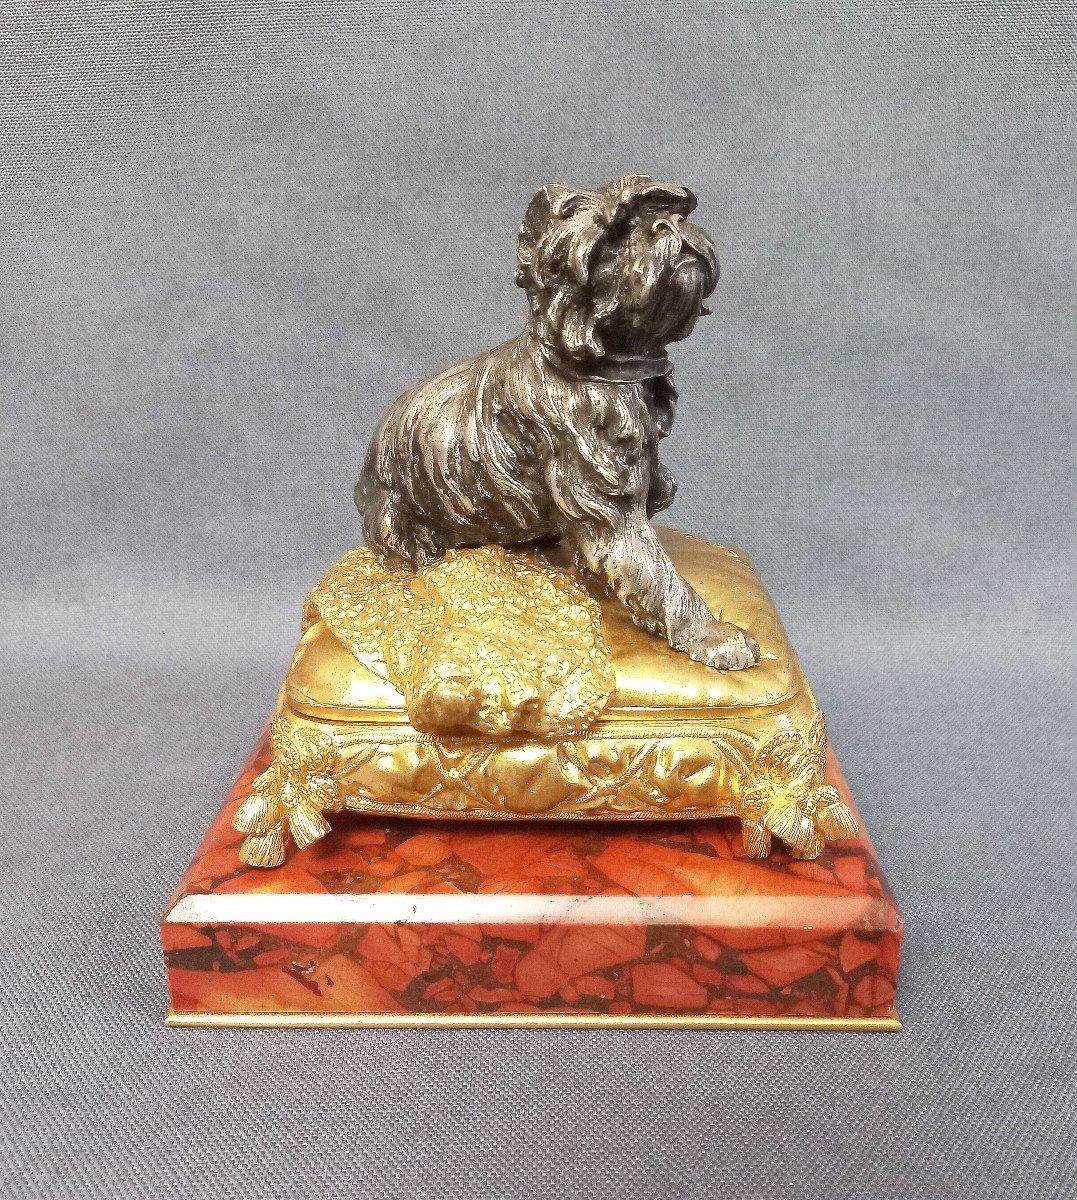 Prosper Lecourtier, chiseled and gilded bronze jewelry box representing a small chiseled and silvered bronze dog on a cushion garnished with trimmings on a red marble base.
Interior padded in blue satin.
Signed P Lecourtier.
In perfect